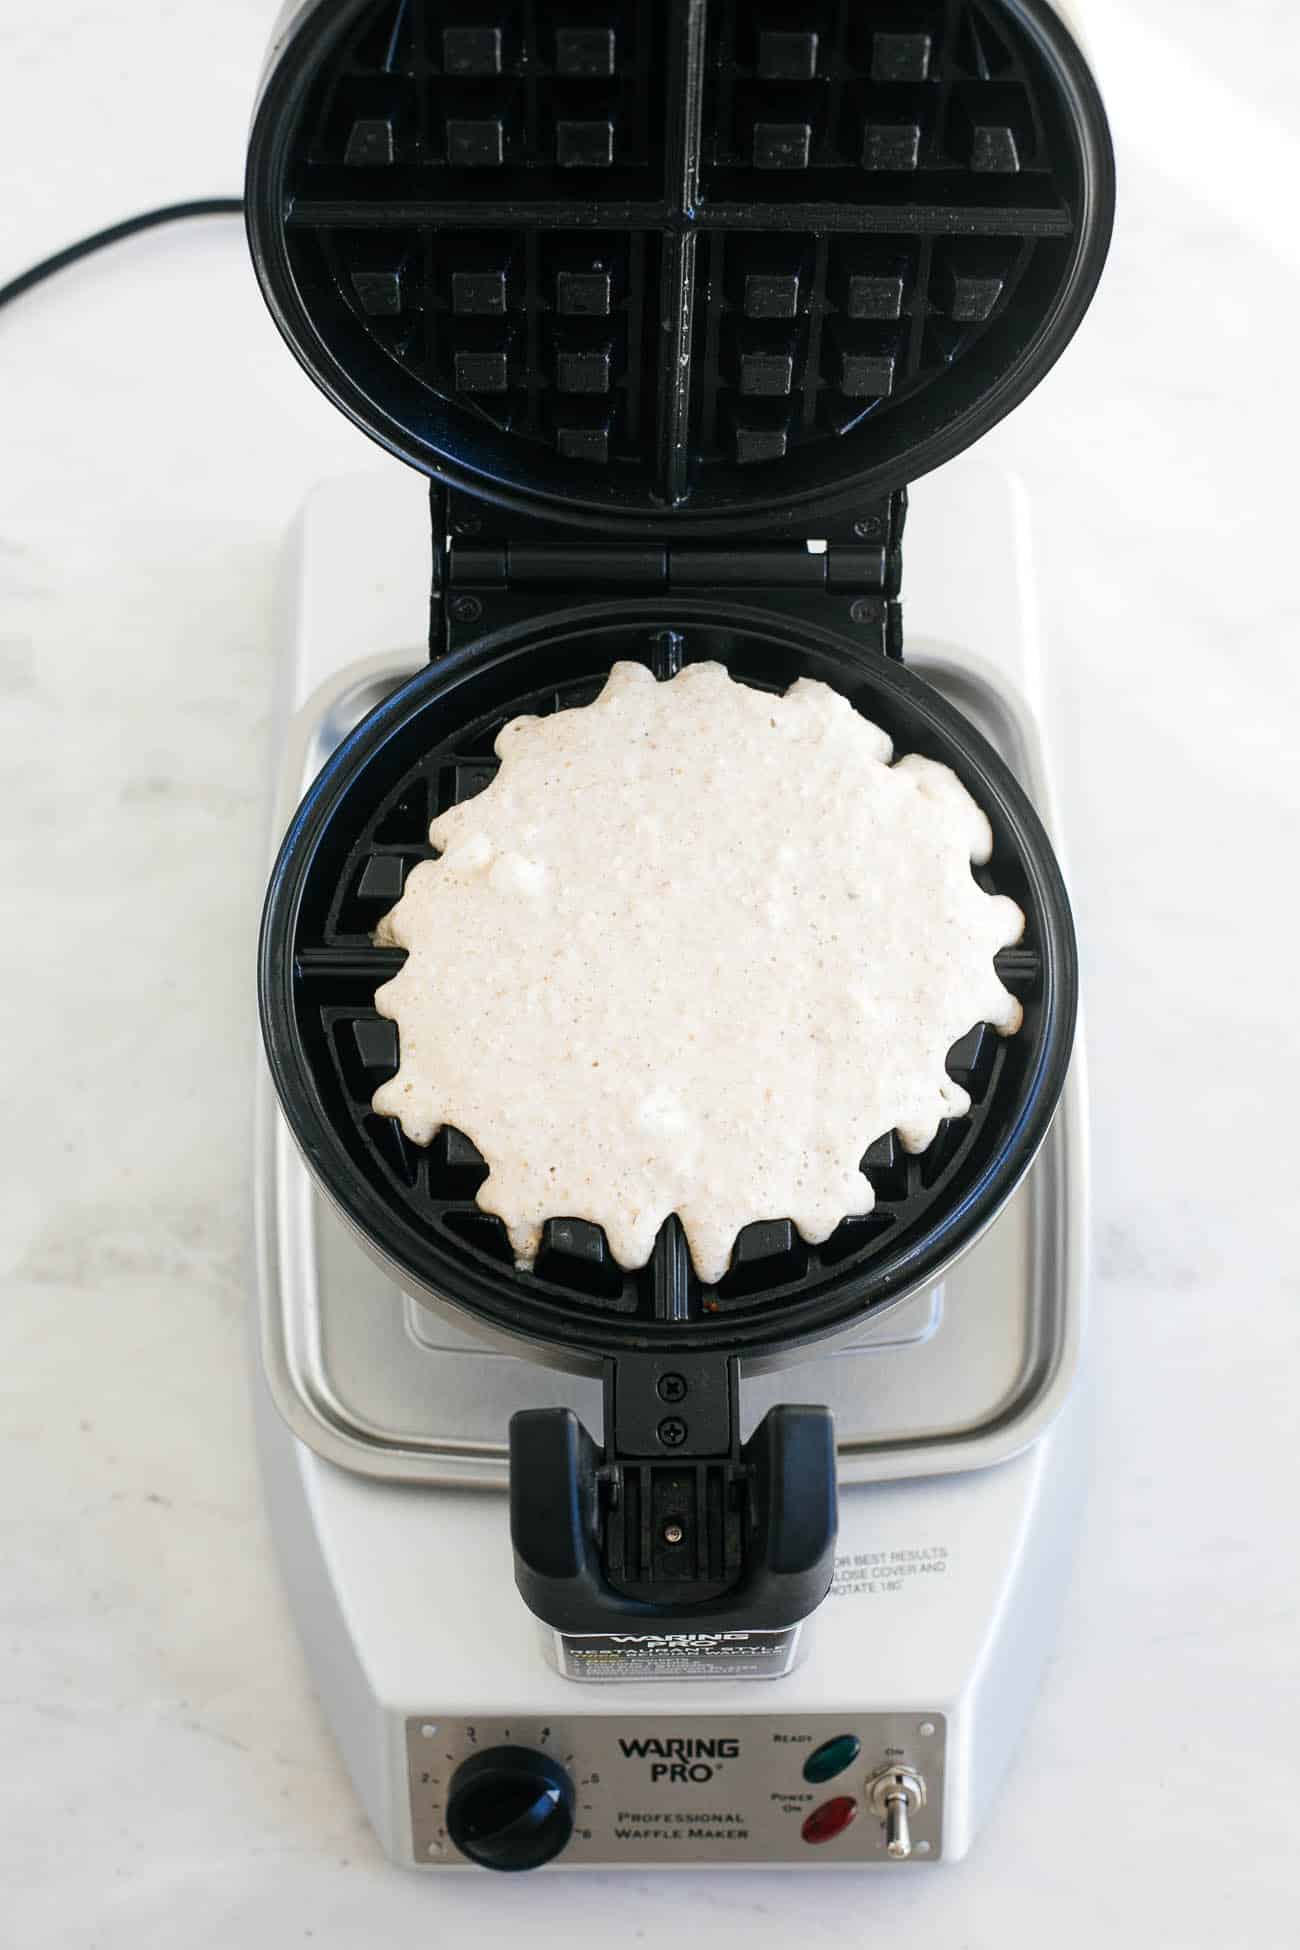 Batter going into a waffle maker.